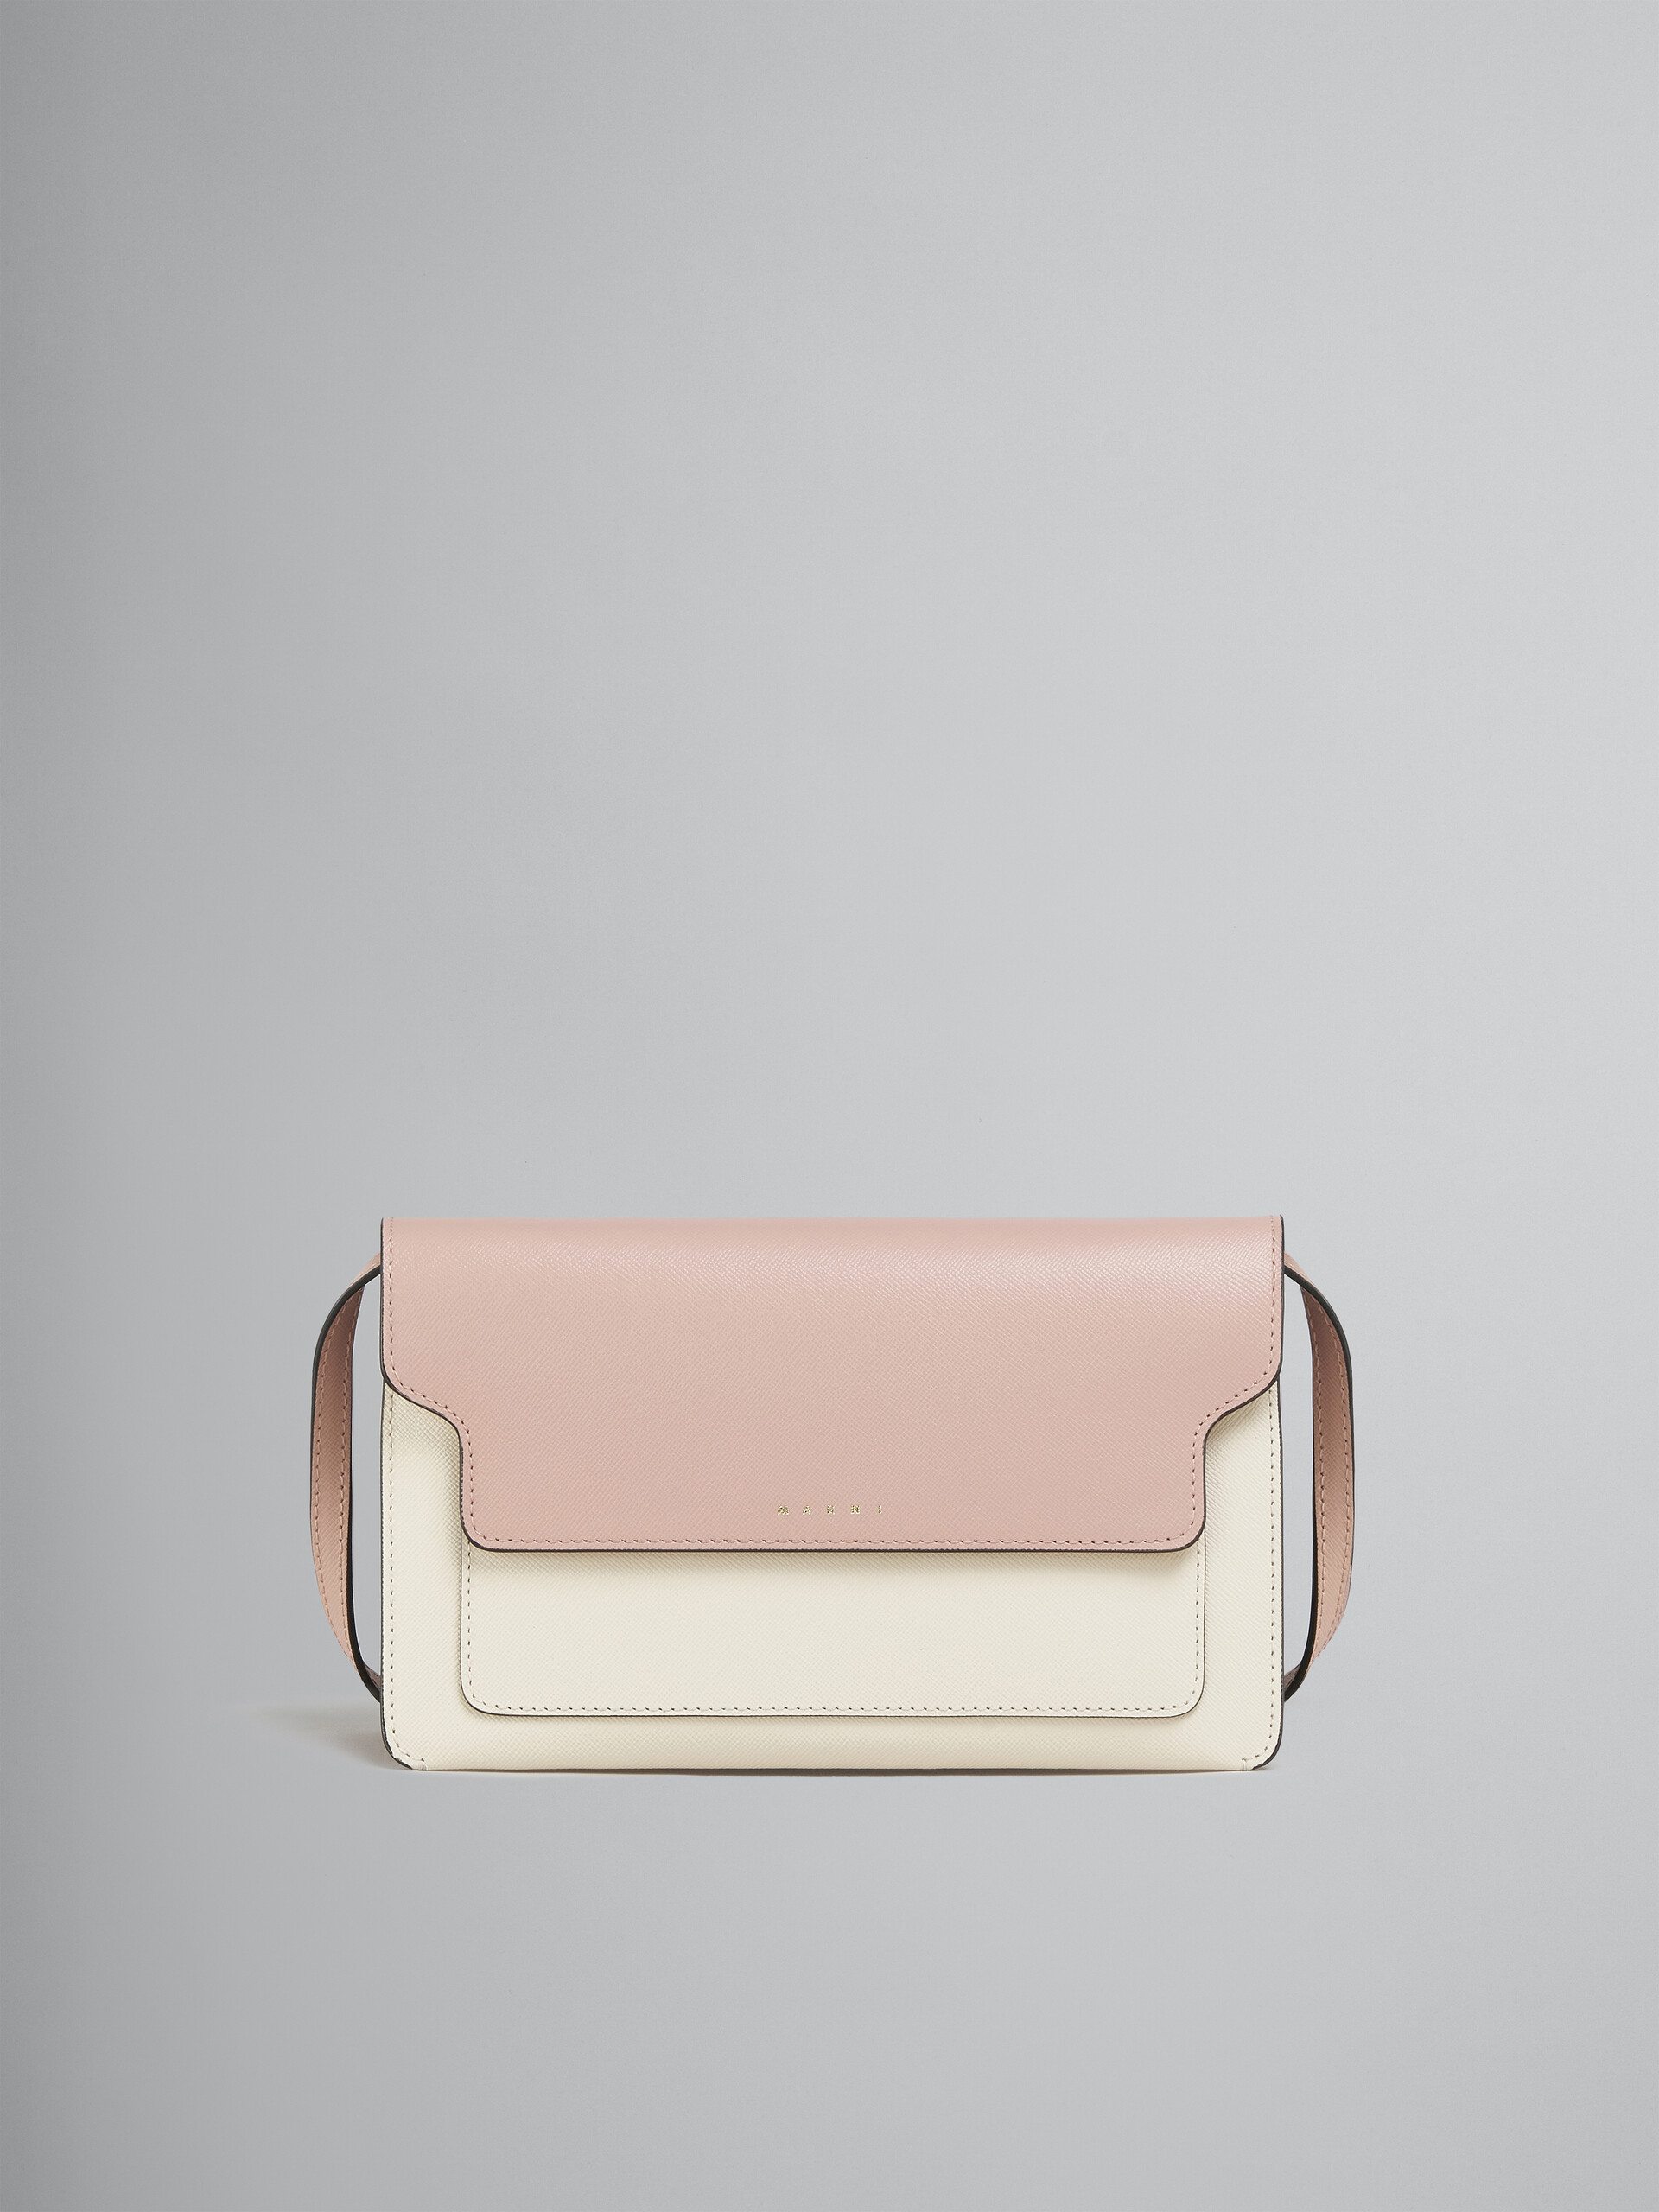 Trunk Clutch in pink white and beige saffiano leather - Pochette - Image 1